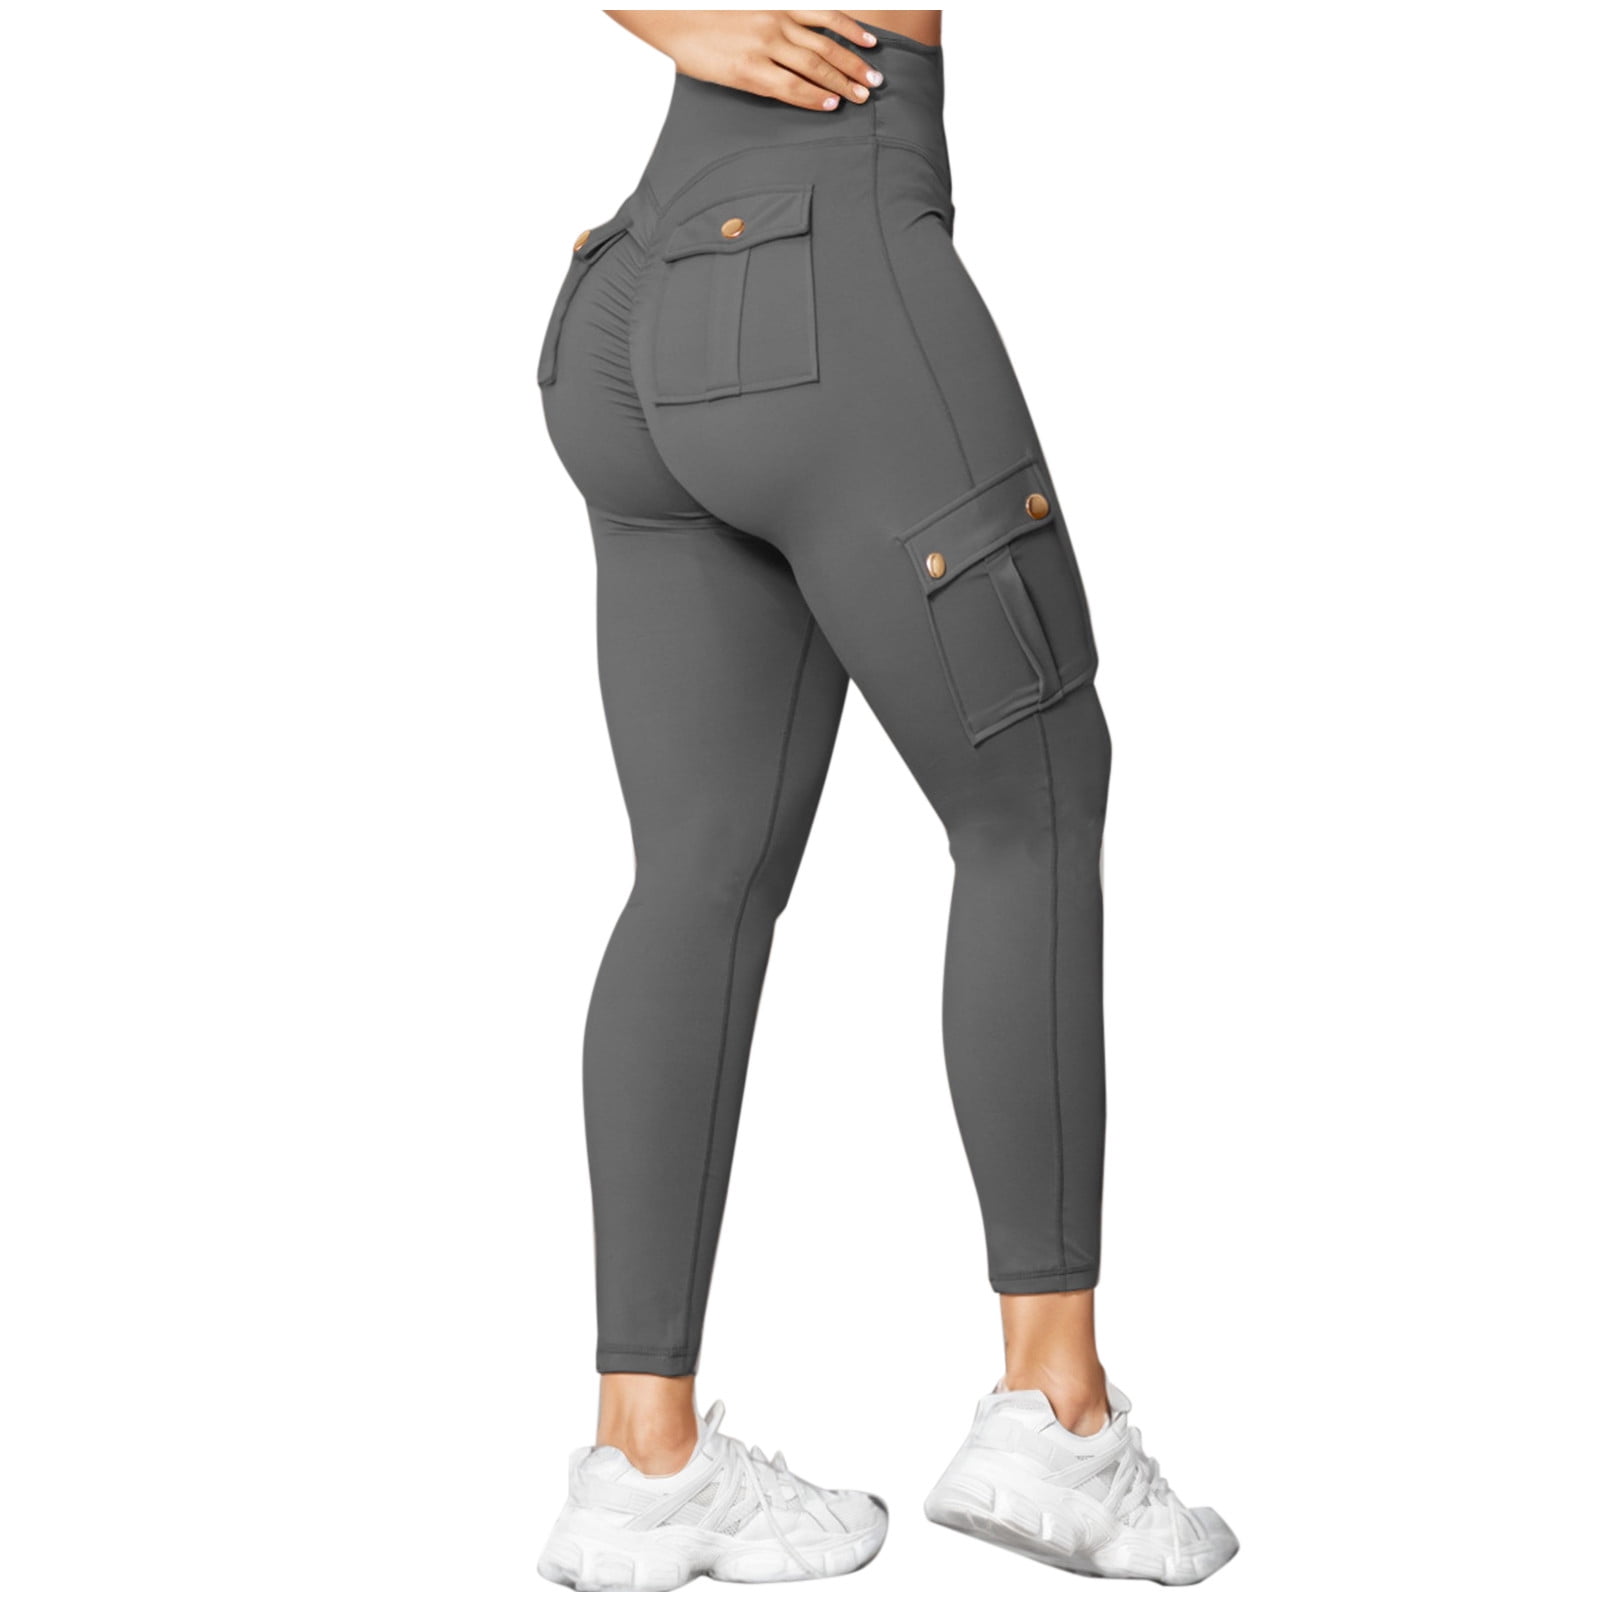 AherBiu Cargo Leggings for Women High Waisted Gym Yoga Pants Workout  Stretchy Cargo Pants with Multi Pockets 